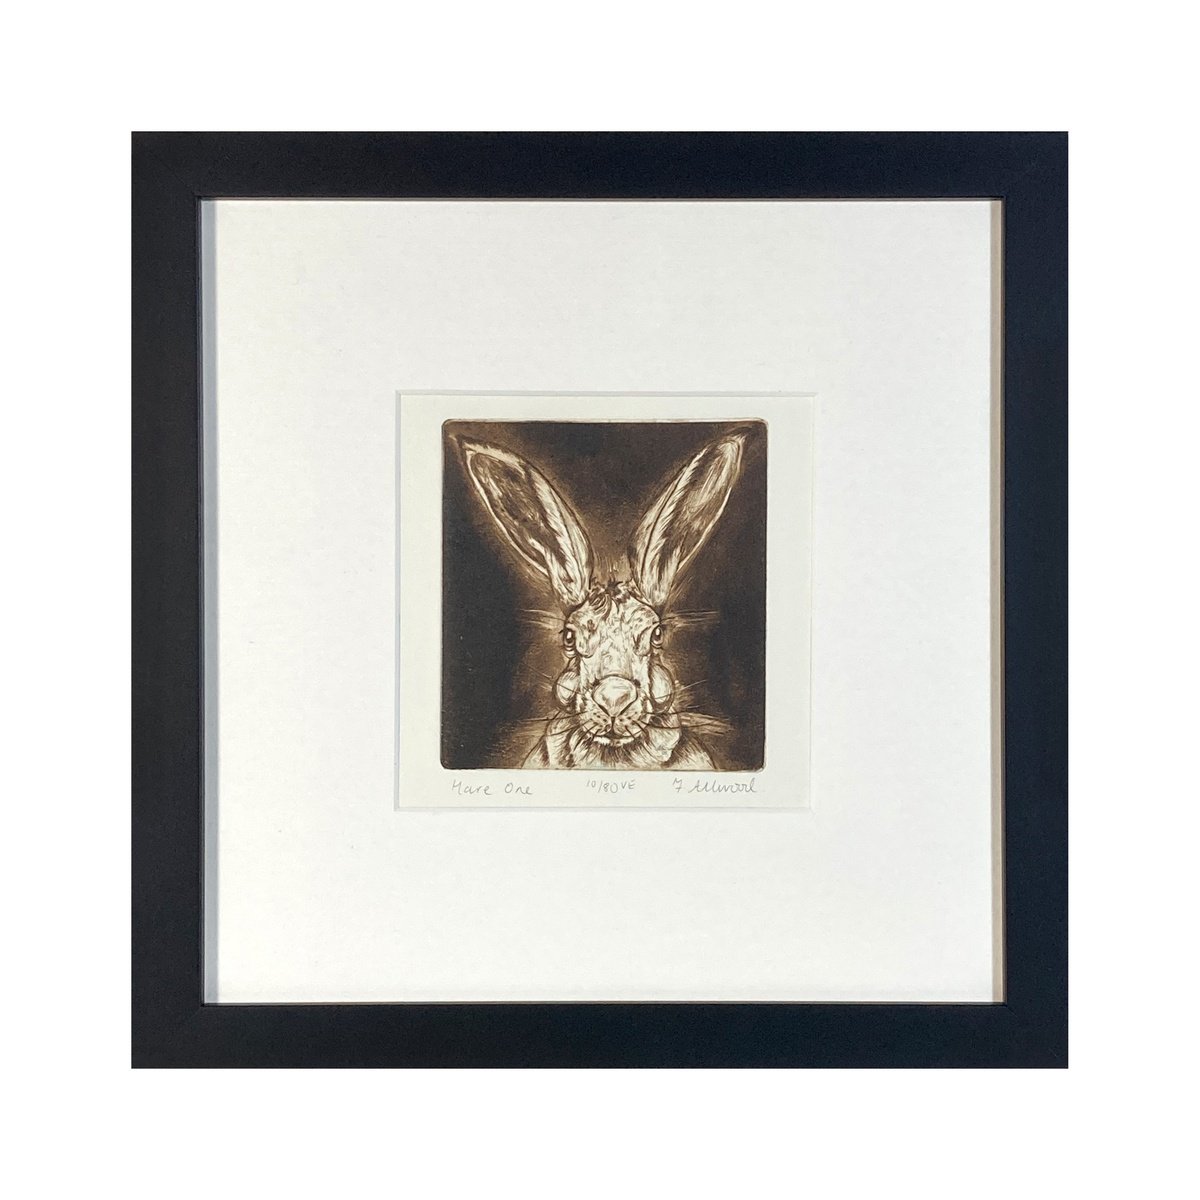 Hare One by Francis Allwood